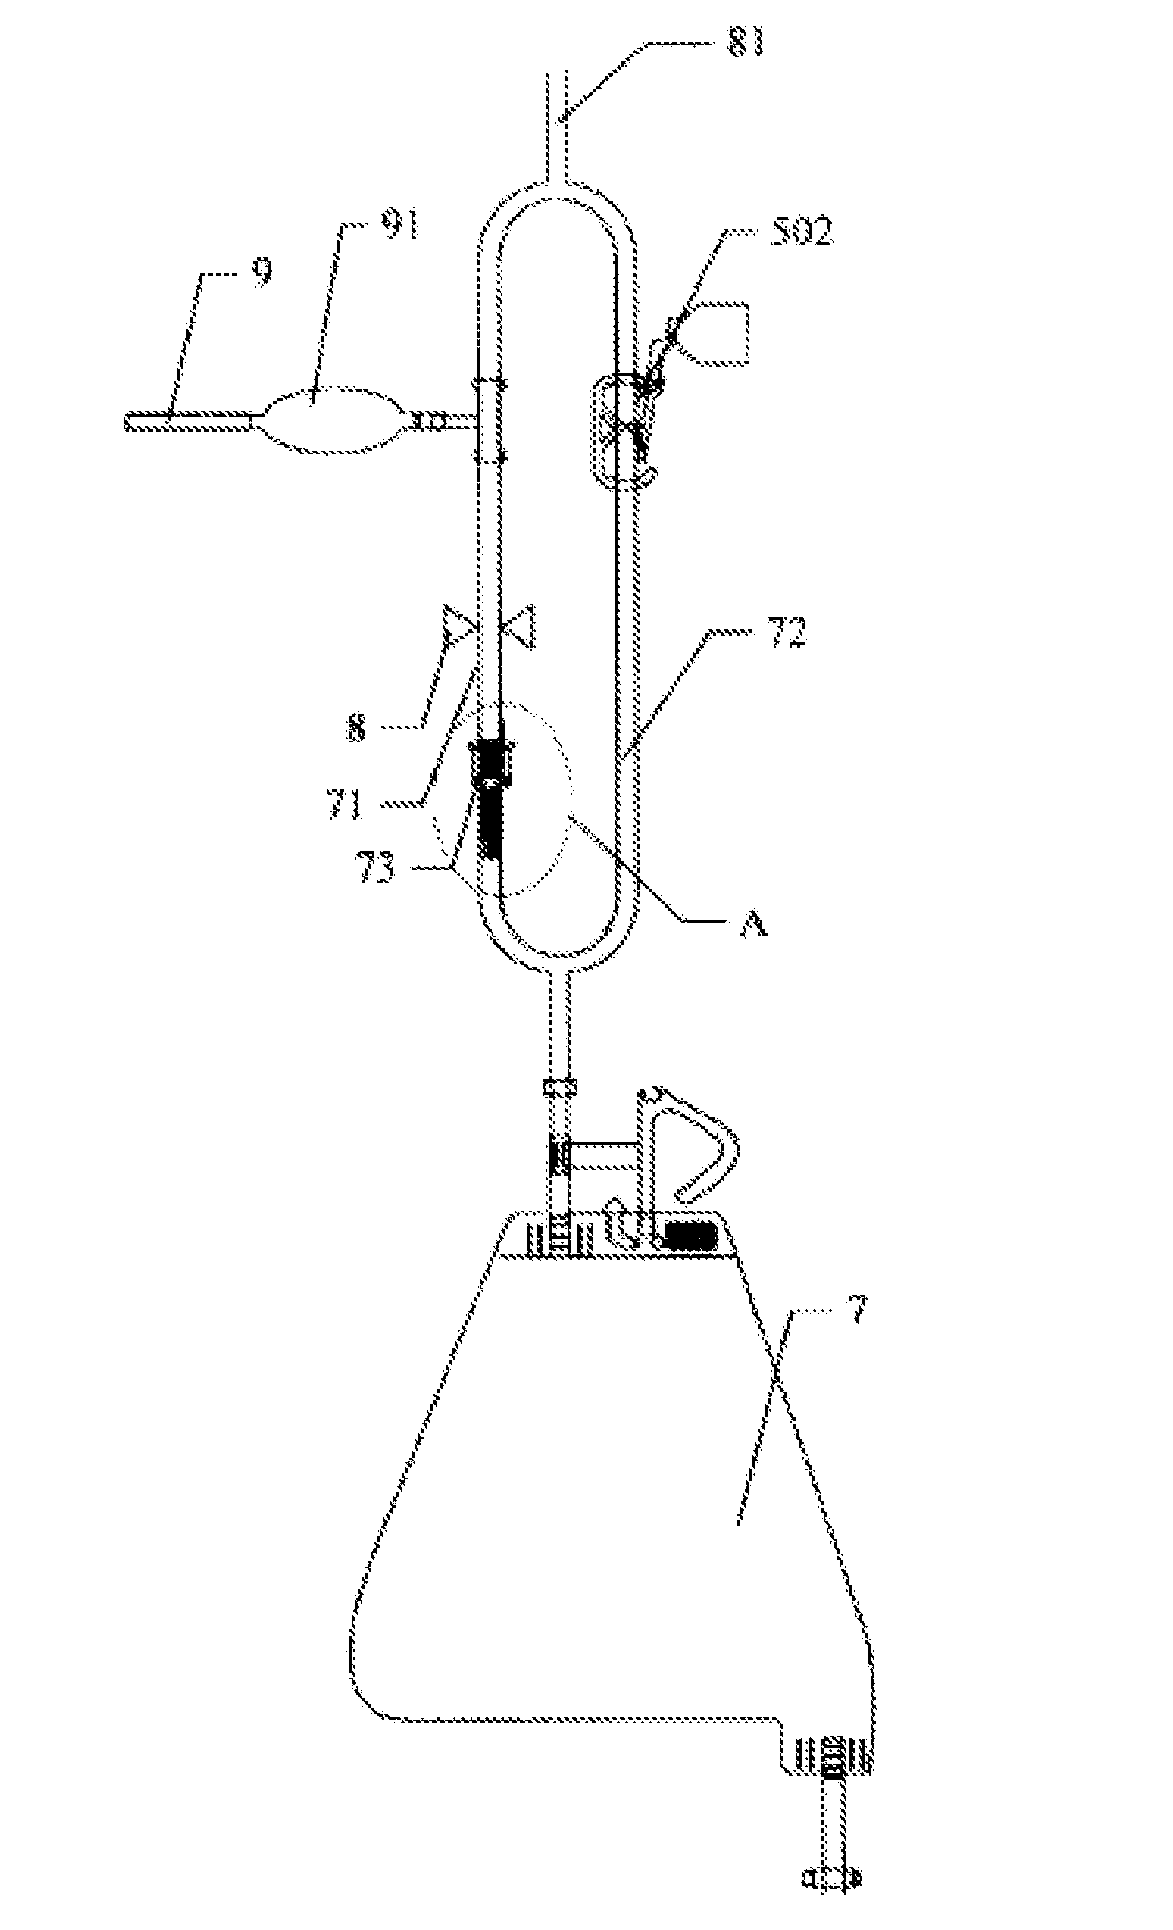 System and method for monitoring bladder and abdominal pressures, and bladder function recovery system